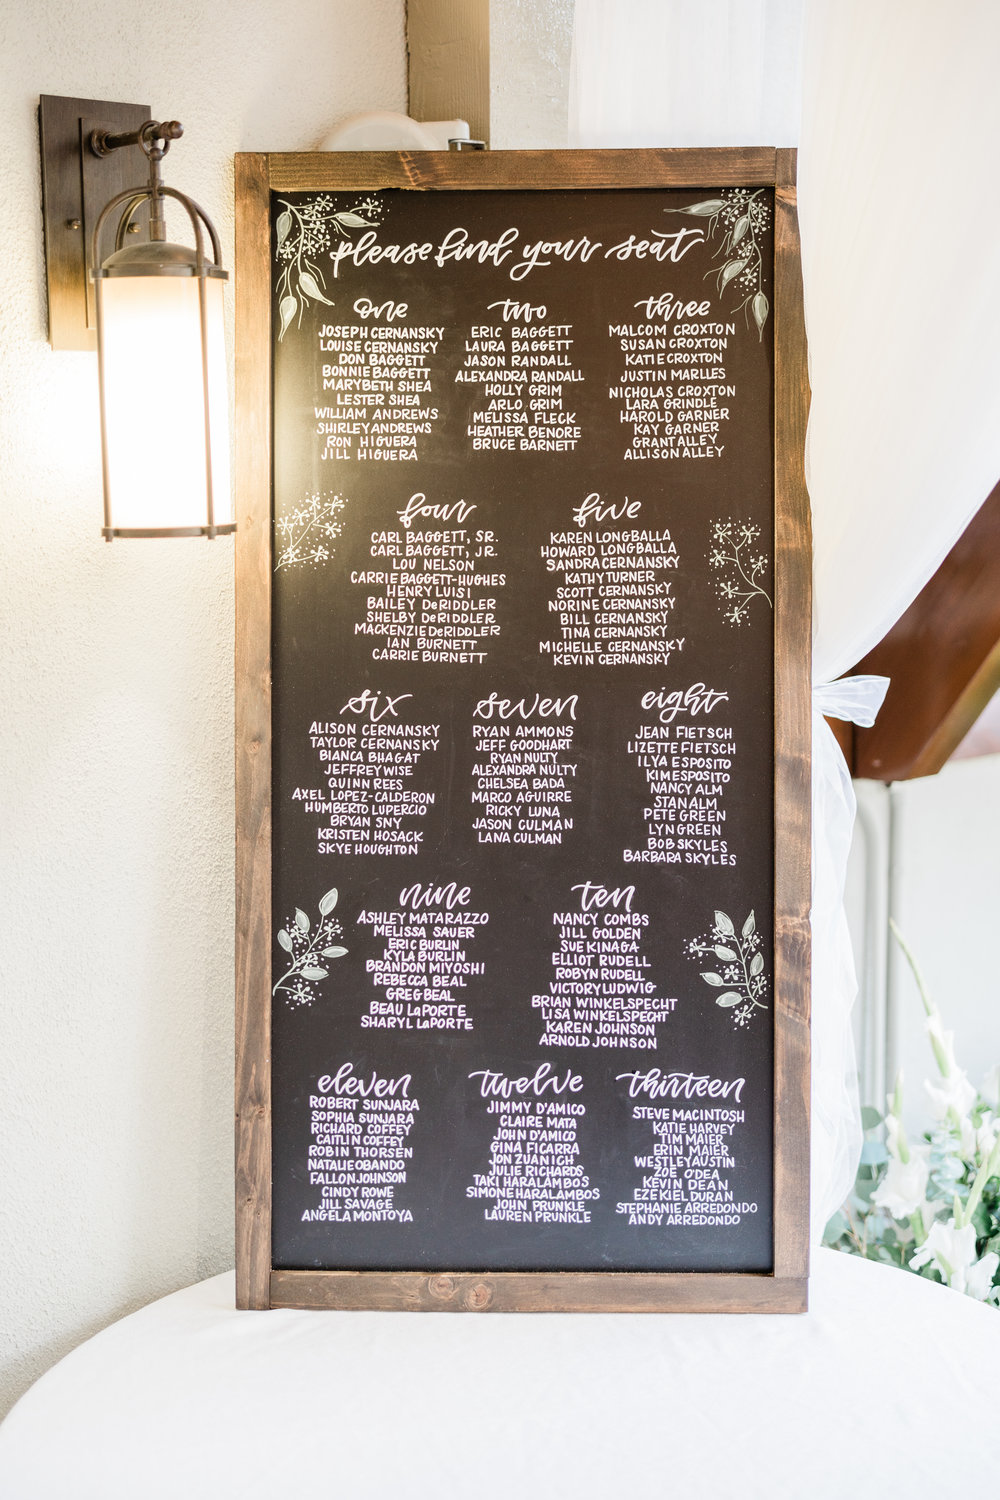 Brittany + Evan - Details - Hitched Photo69.JPG